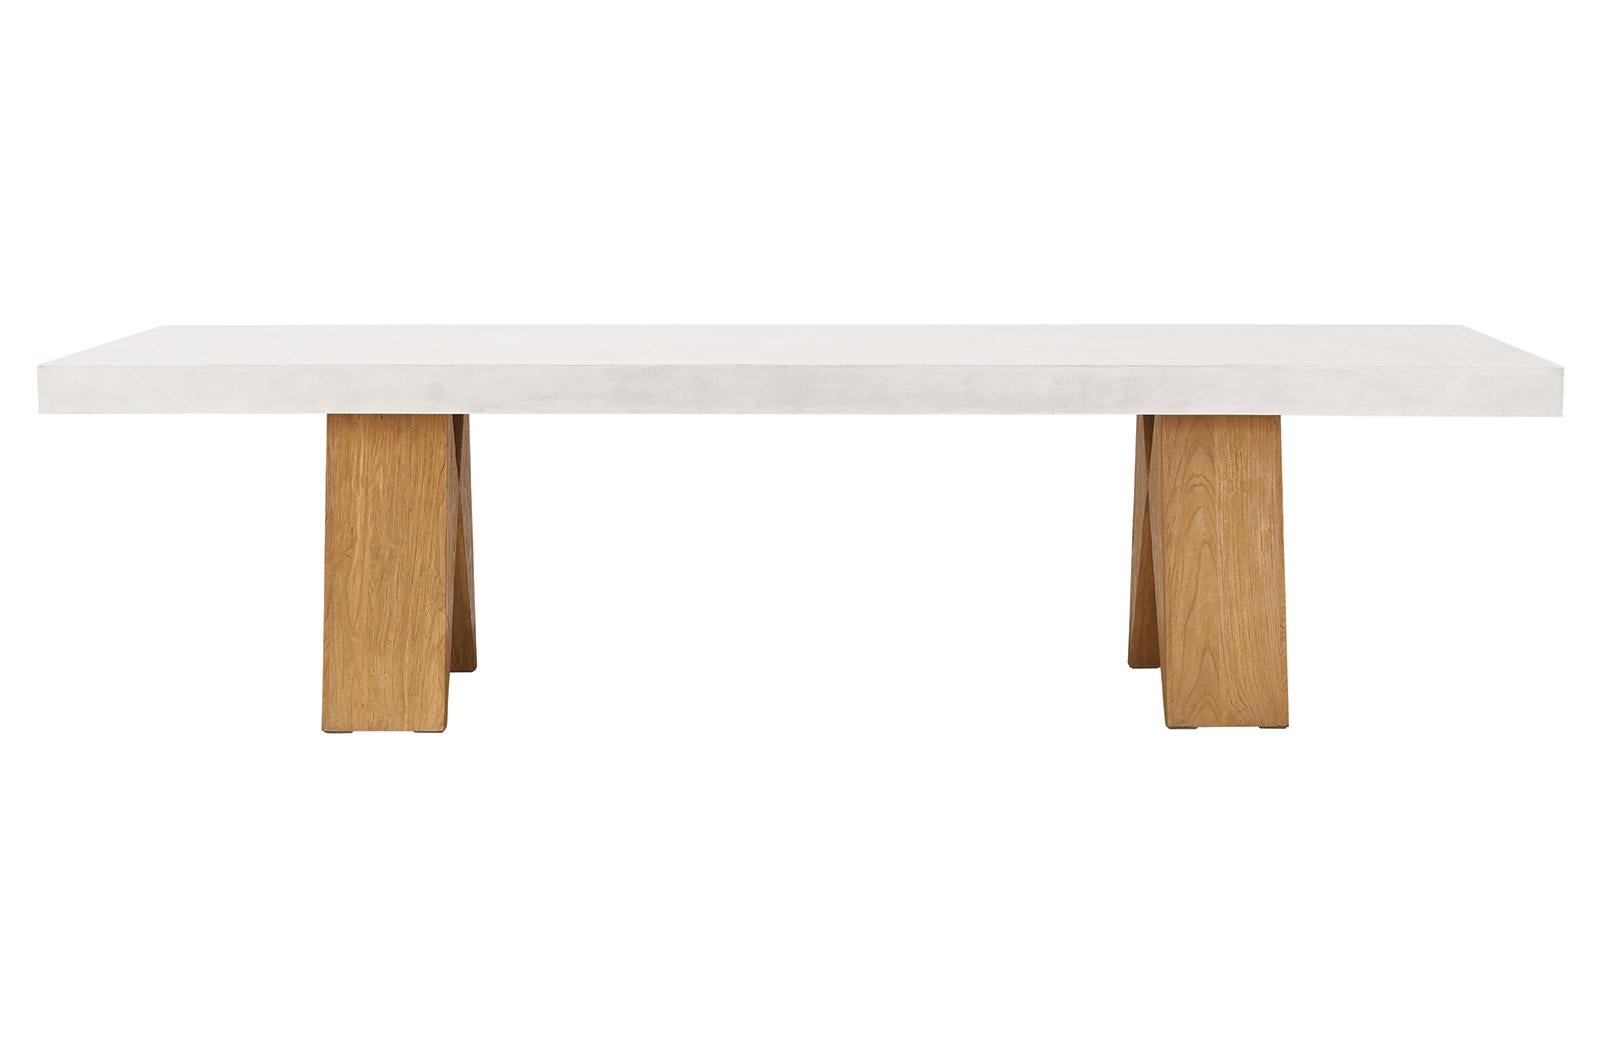 Lightweight concrete table will add a contemporary touch to every indoor and outdoor occasion. 
Hand sanded with natural sands for a softer appearance and polishing. 

Dimensions: 118